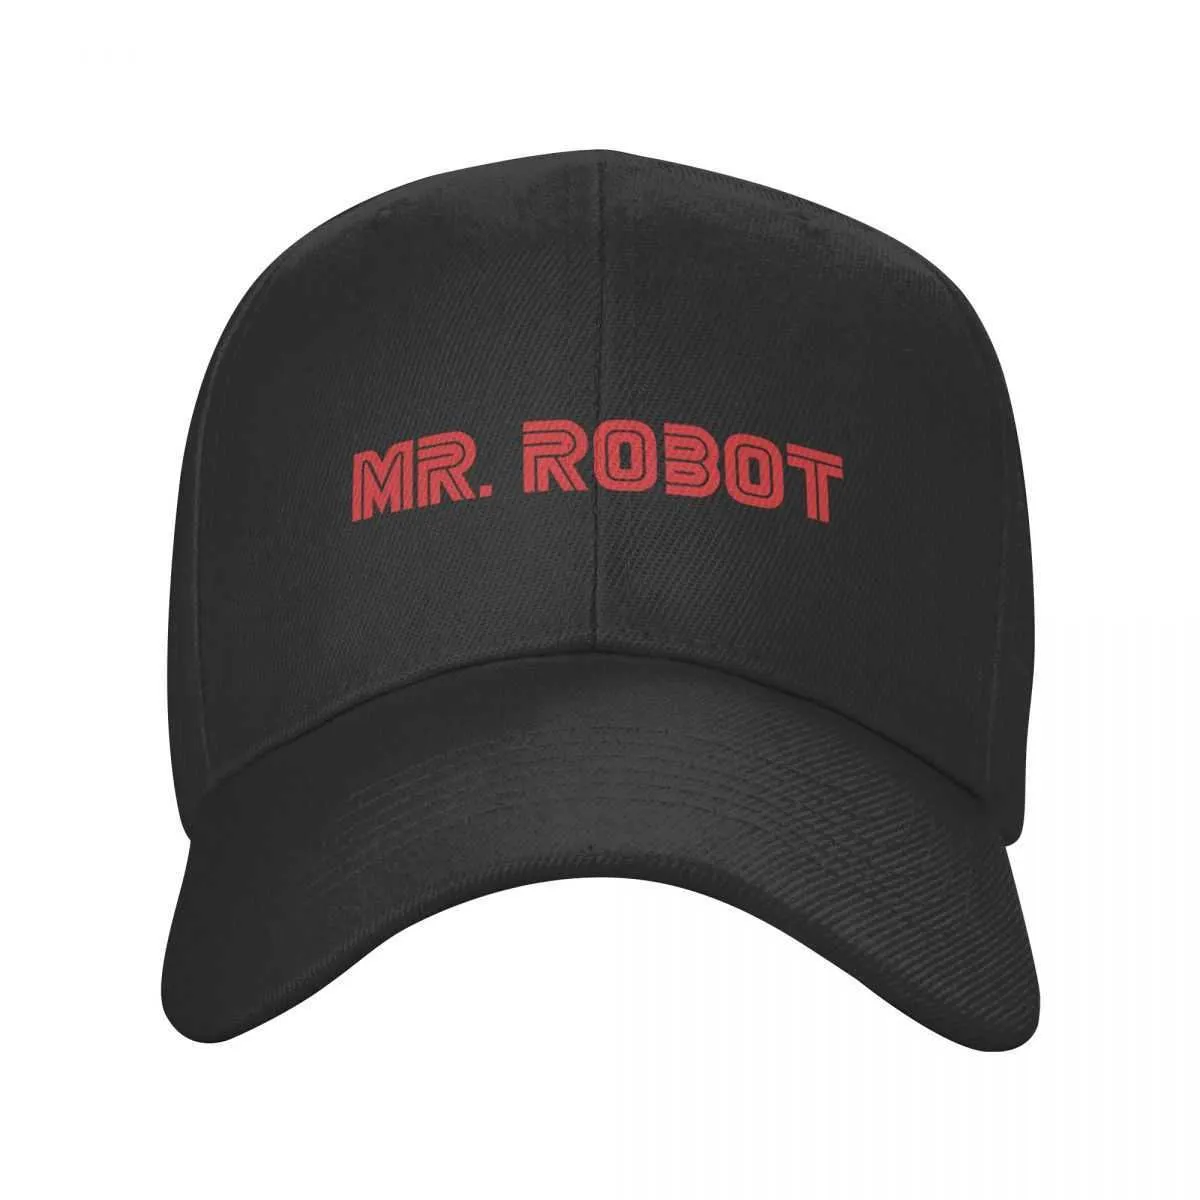 Ball Classic Mr Robot Baseball Cap for Men Women Personalized Adjustable Adult FSociety Hacker Dad Hat Hip Hop Snapback Caps 1206